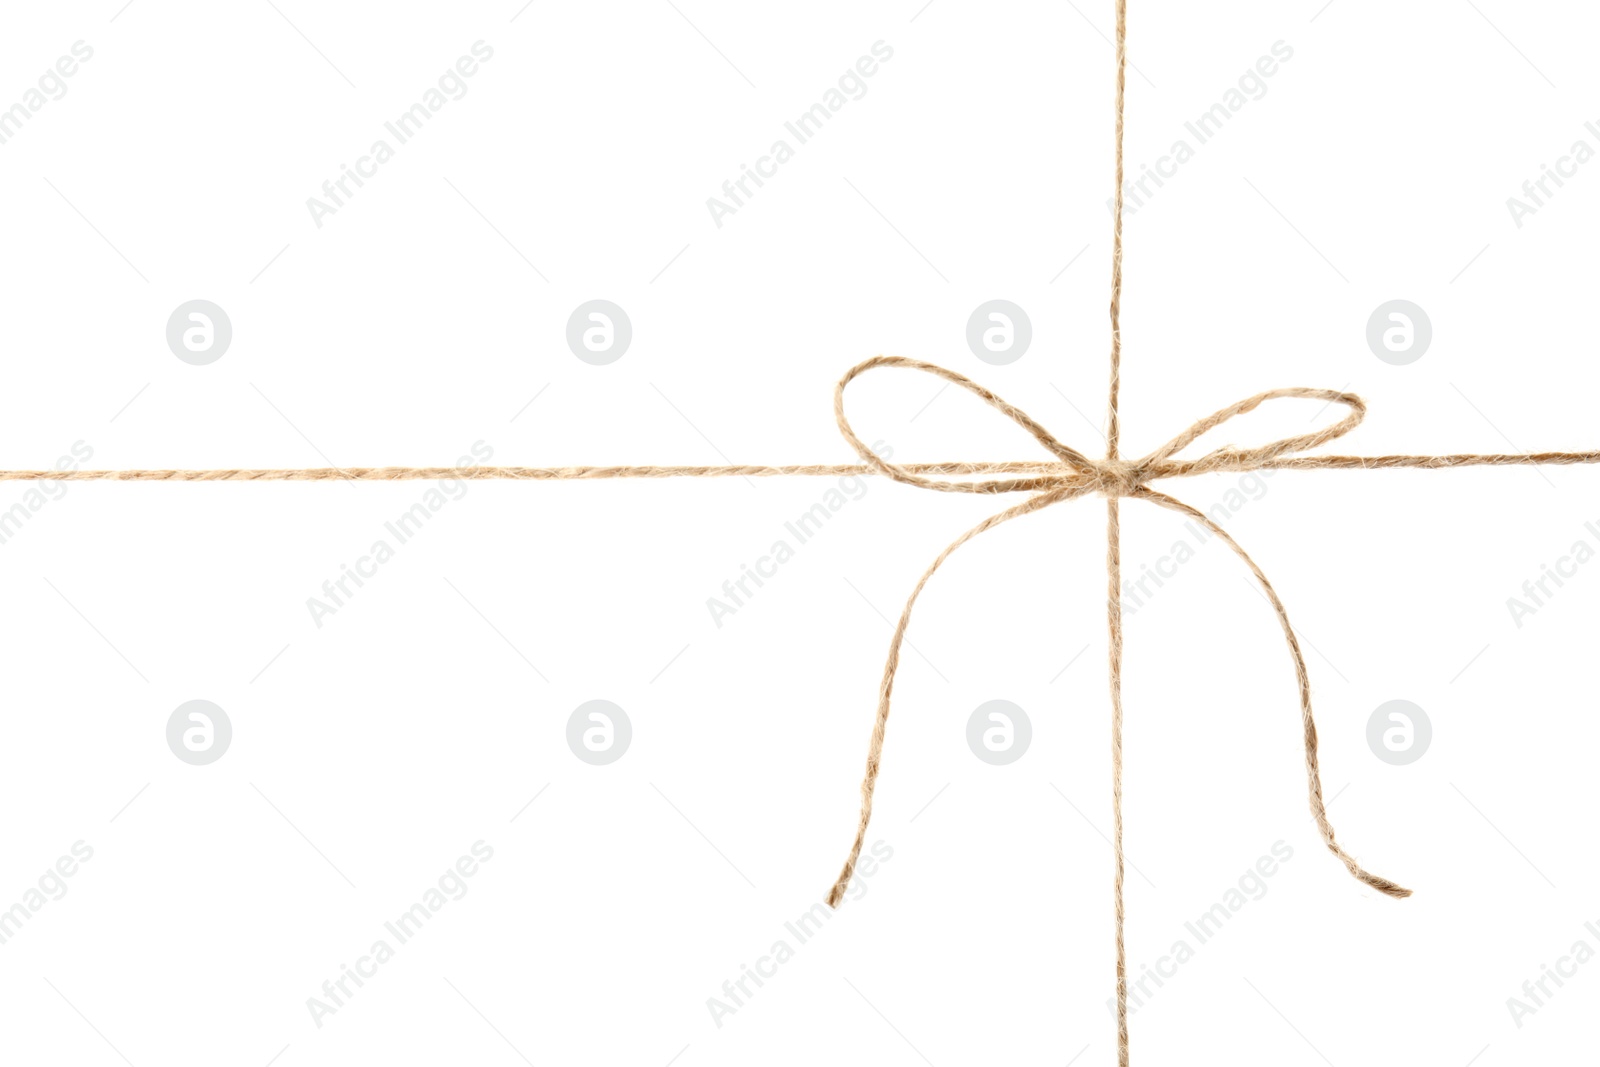 Photo of Hemp rope with bow knot on white background